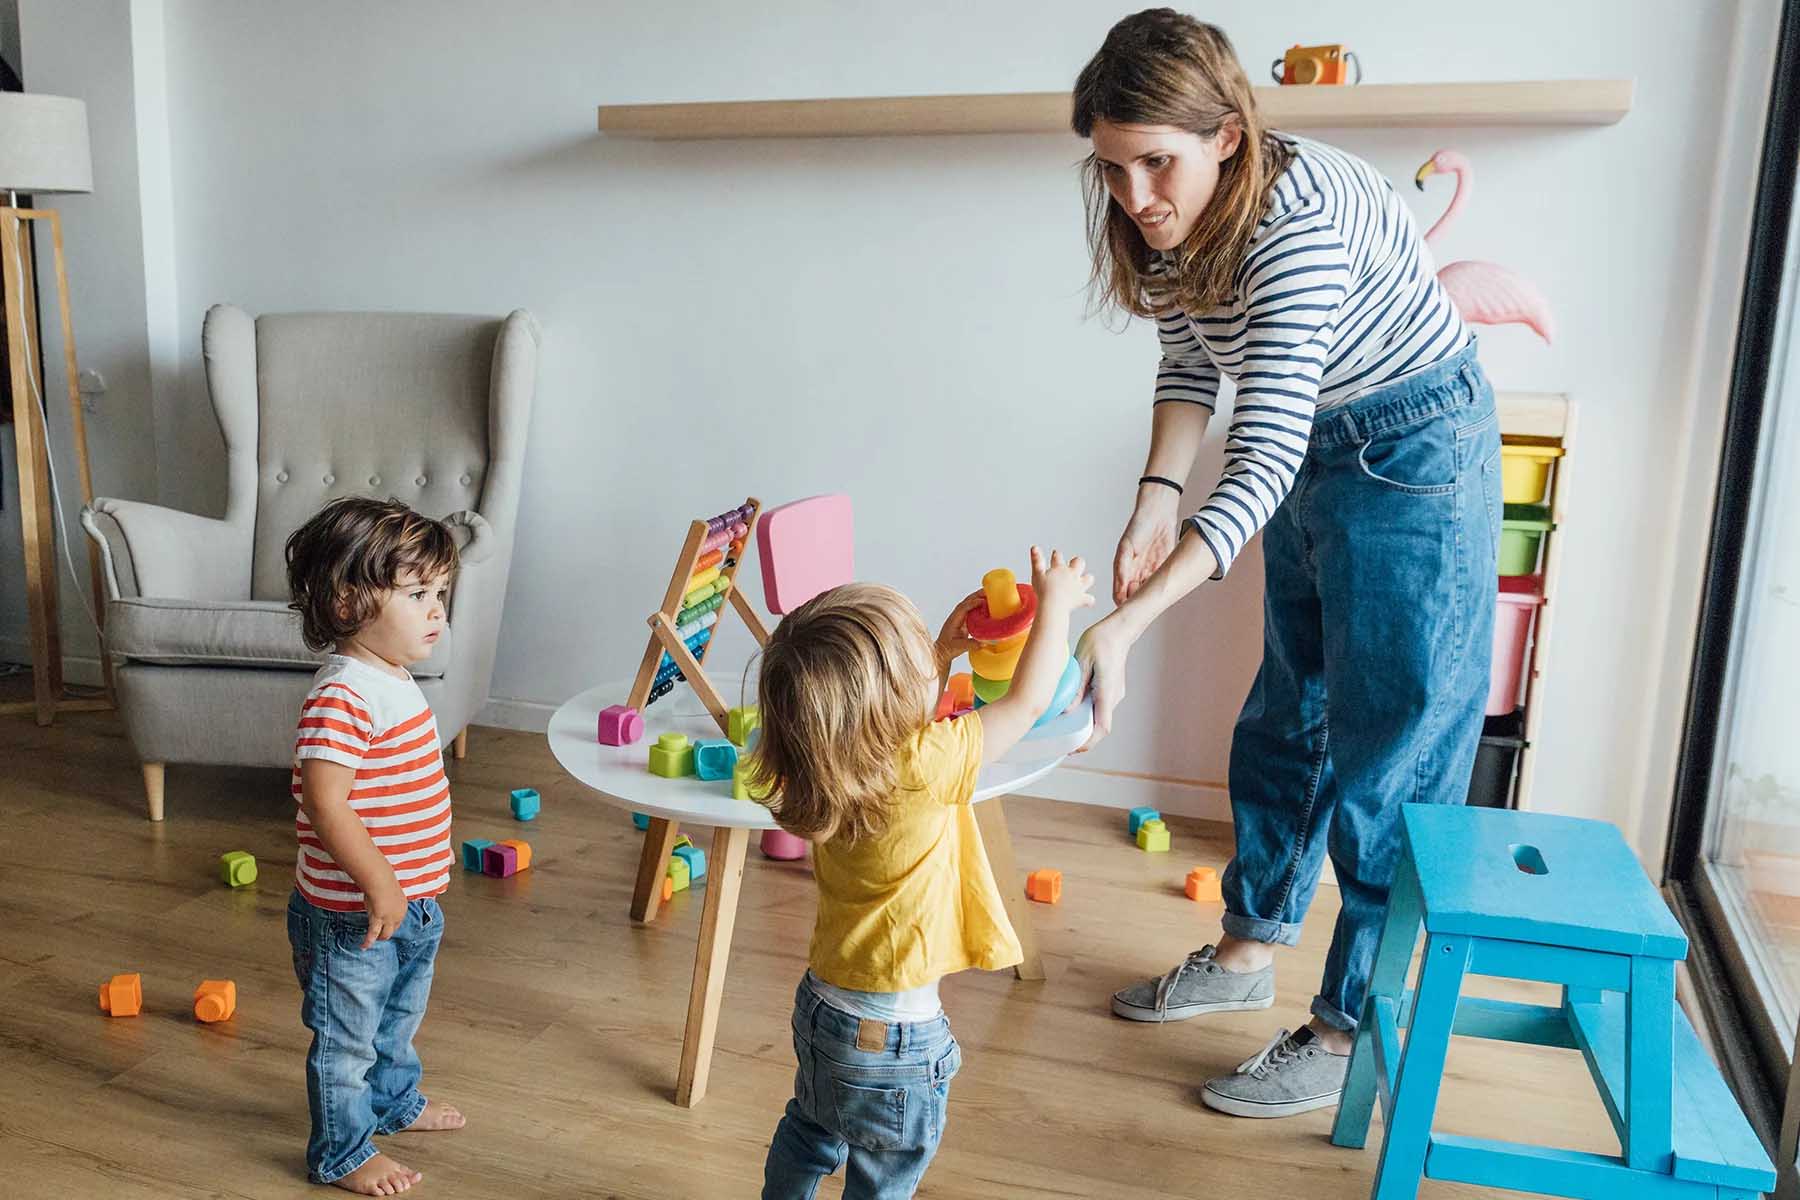 A preschool teacher with two children in a classroom, toys around the room